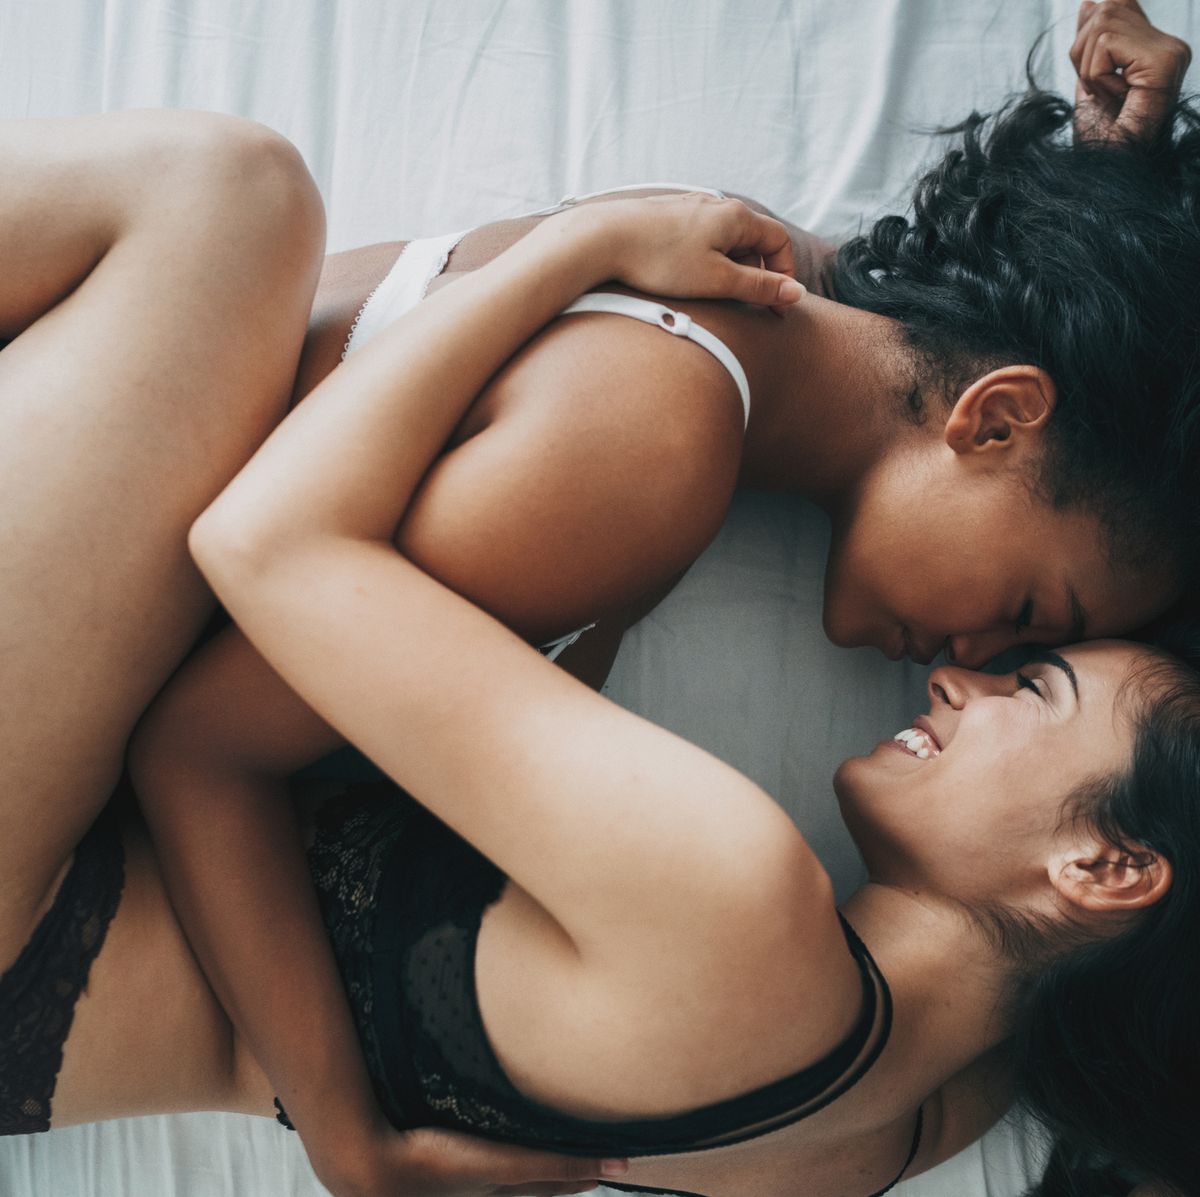 Lesbian Girls Sleeping Nude - 12 Intimate Sex Positions To Up Connection, Per An Expert